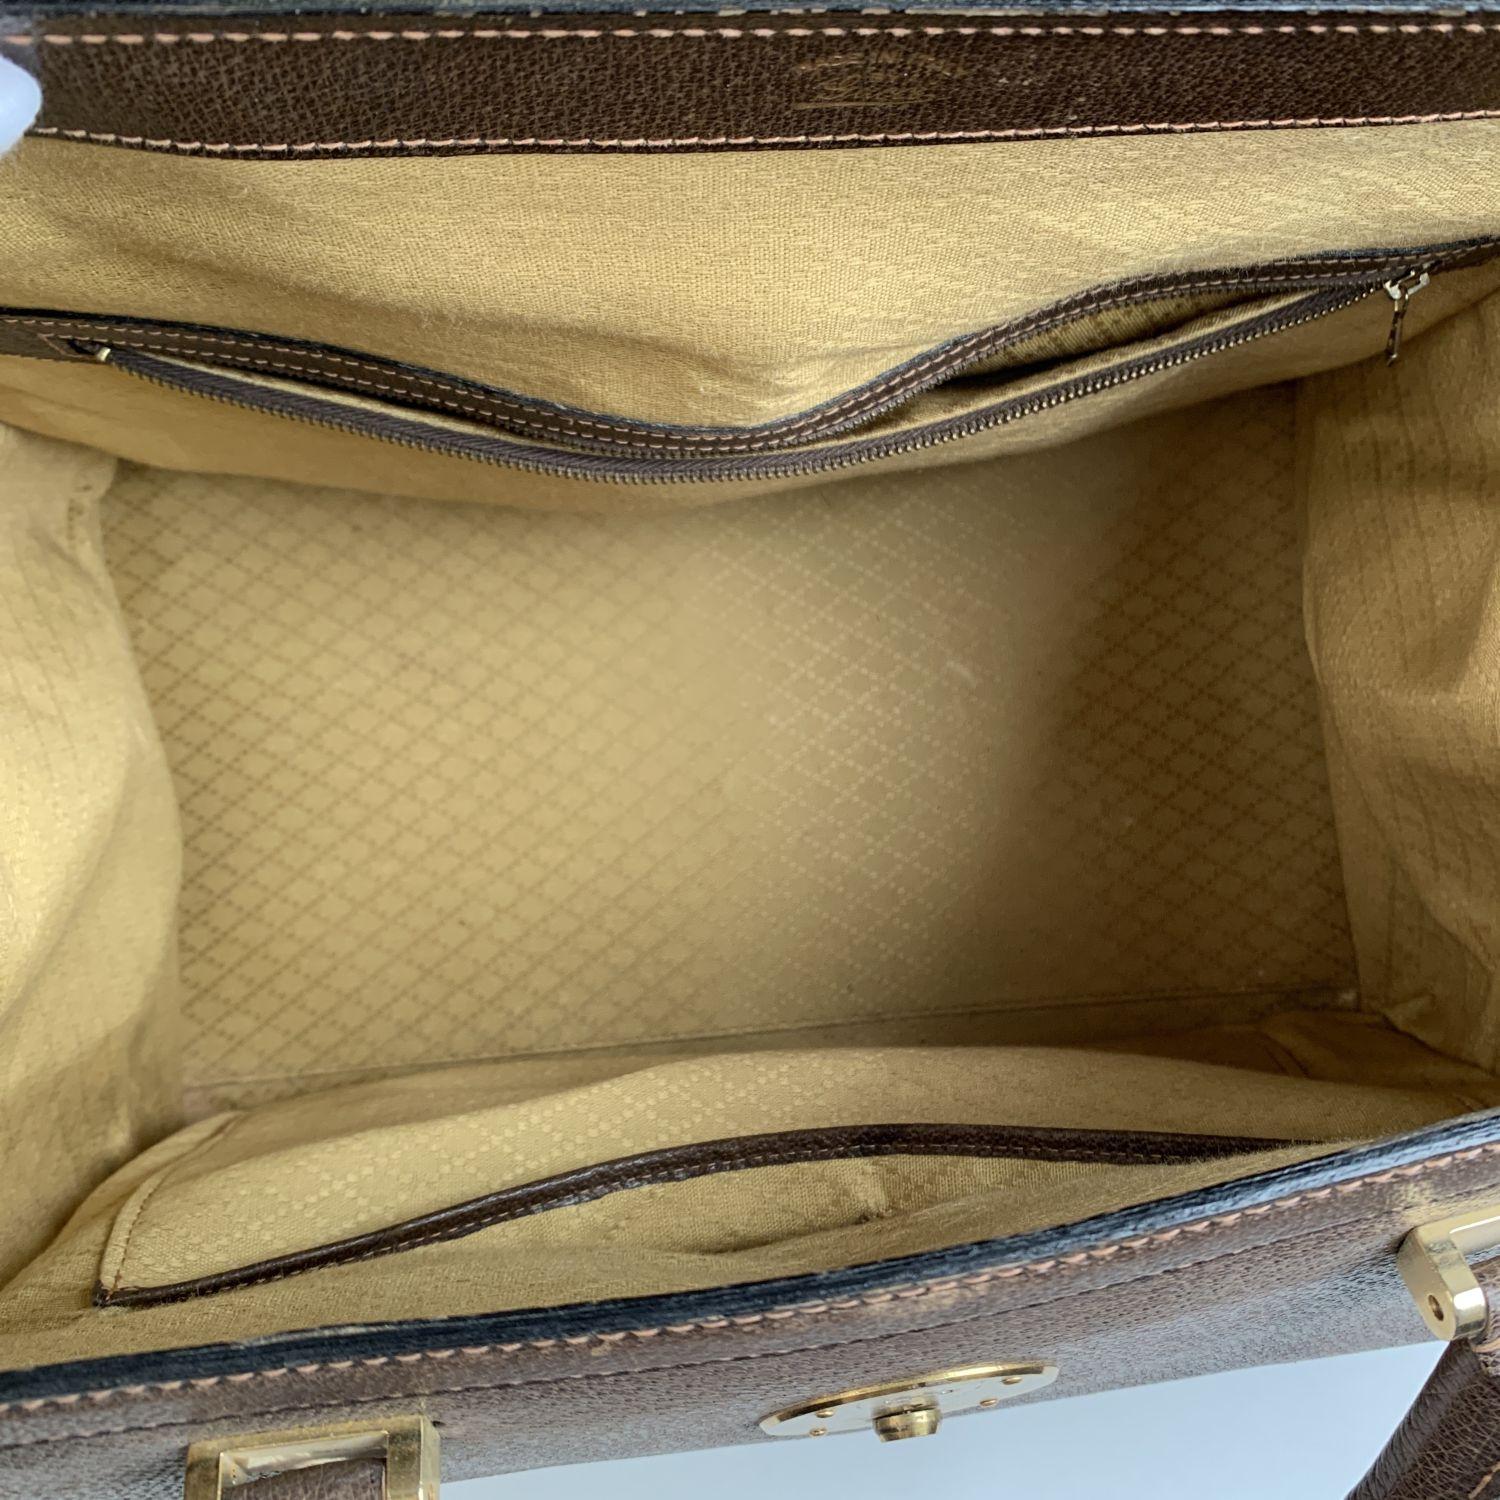 Splendid vintage travel weekend bag by GUCCI, from the early 1970s. With gold metal hardware. It features an upper lock and snap closure + security key closure on sides (keys are not included). Double top carry handles. 5 protective bottom feet.